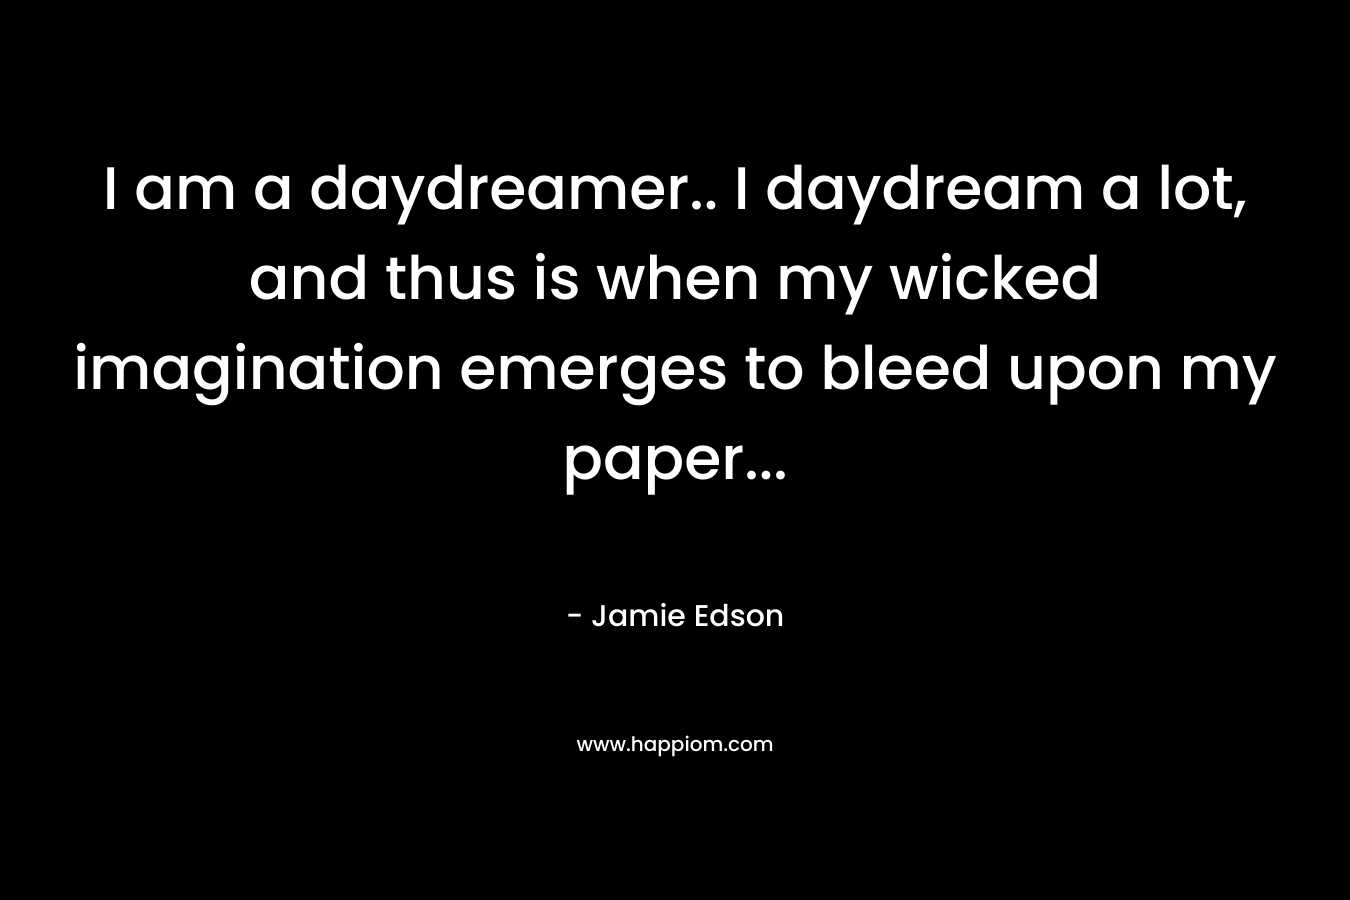 I am a daydreamer.. I daydream a lot, and thus is when my wicked imagination emerges to bleed upon my paper… – Jamie Edson